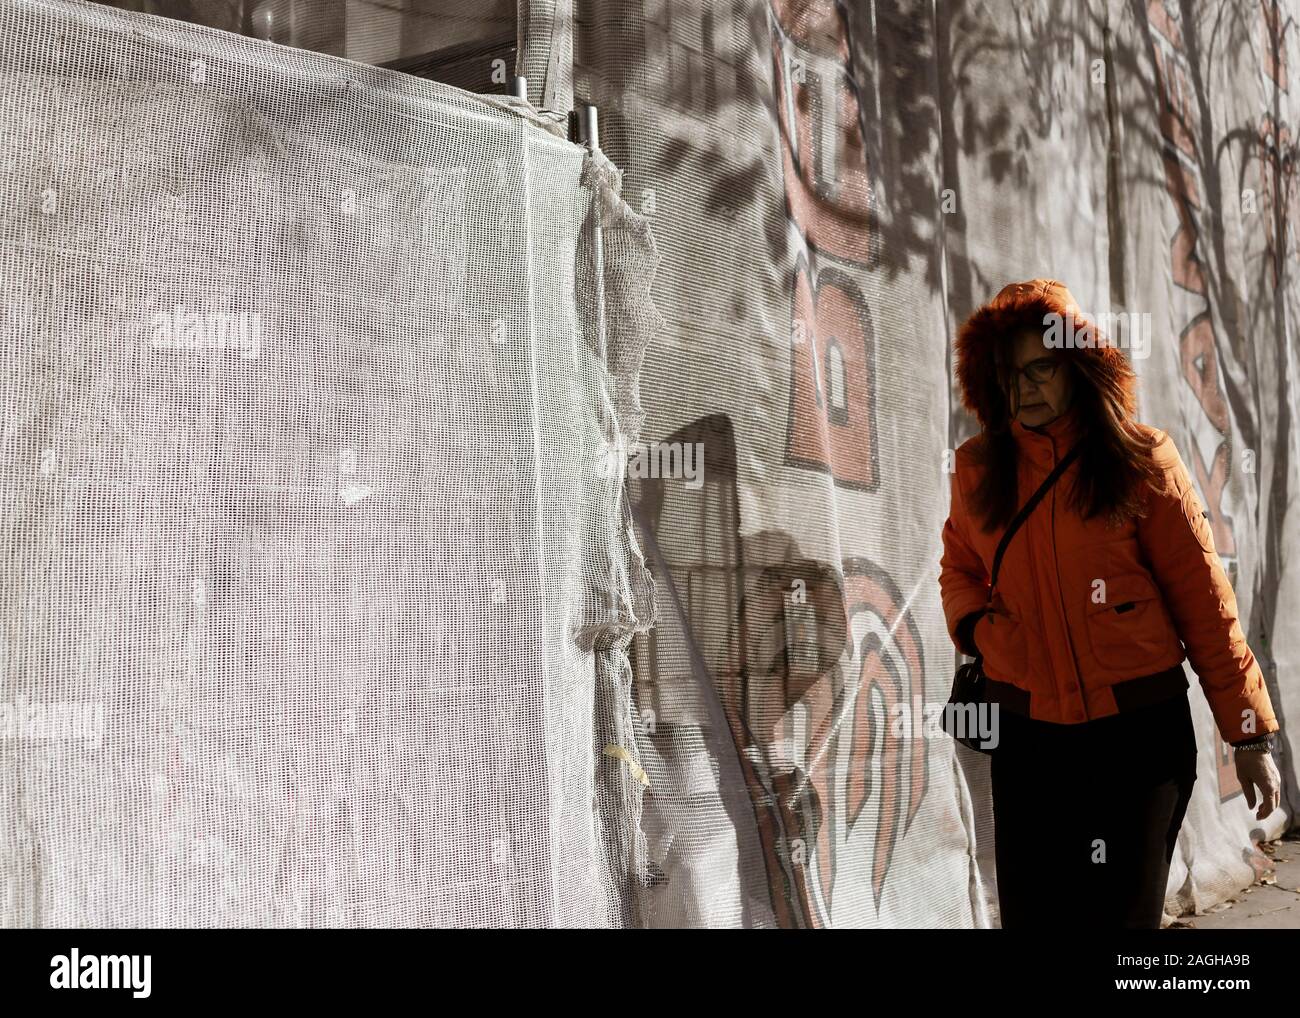 Belgrade, Serbia, Nov 24, 2019: A woman walking down the street next to a scaffold covered wall Stock Photo